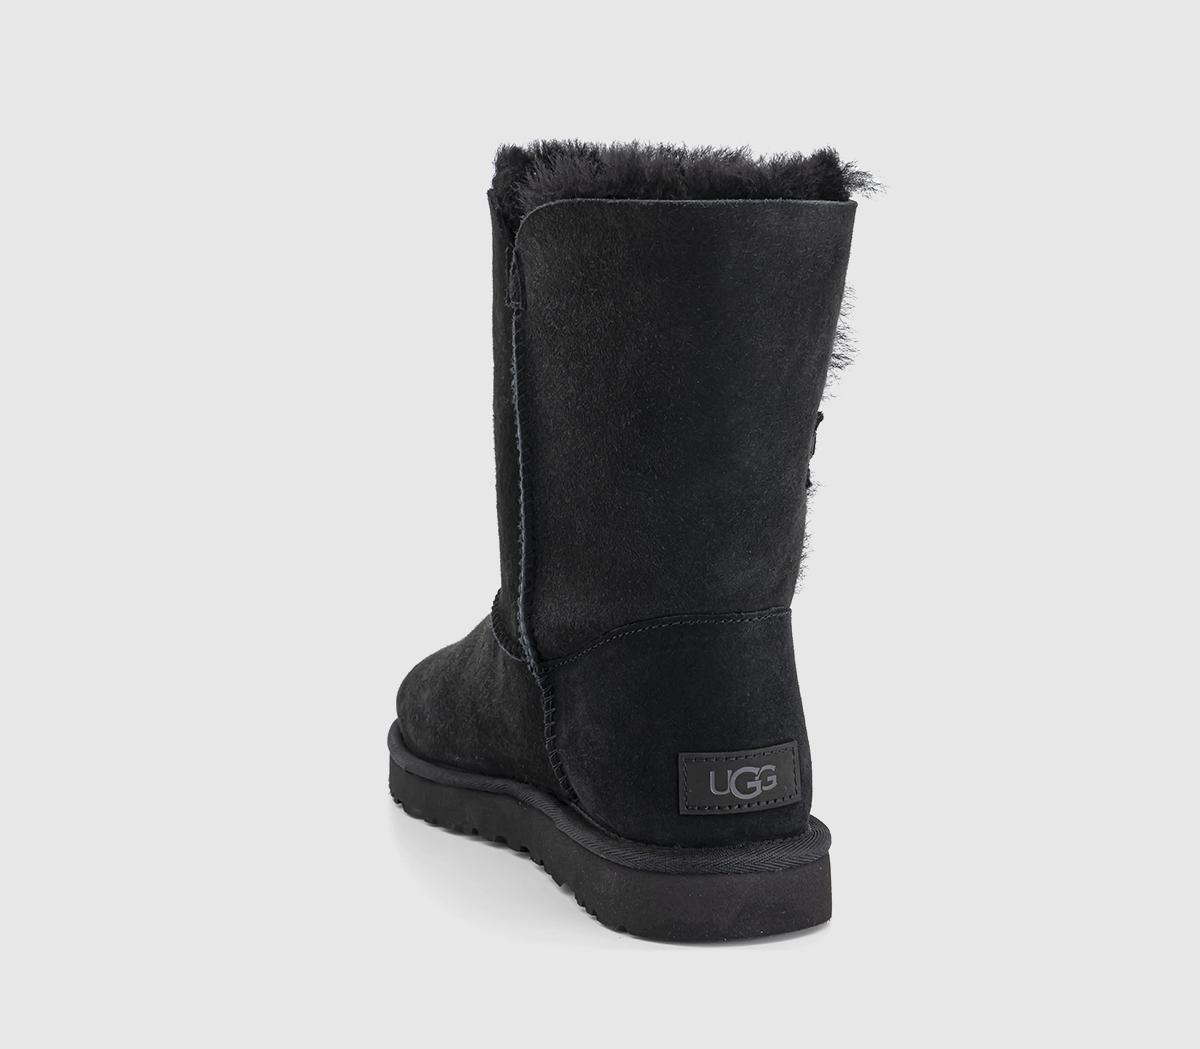 UGG Bailey Button II Boots Black Suede - Women's Ankle Boots